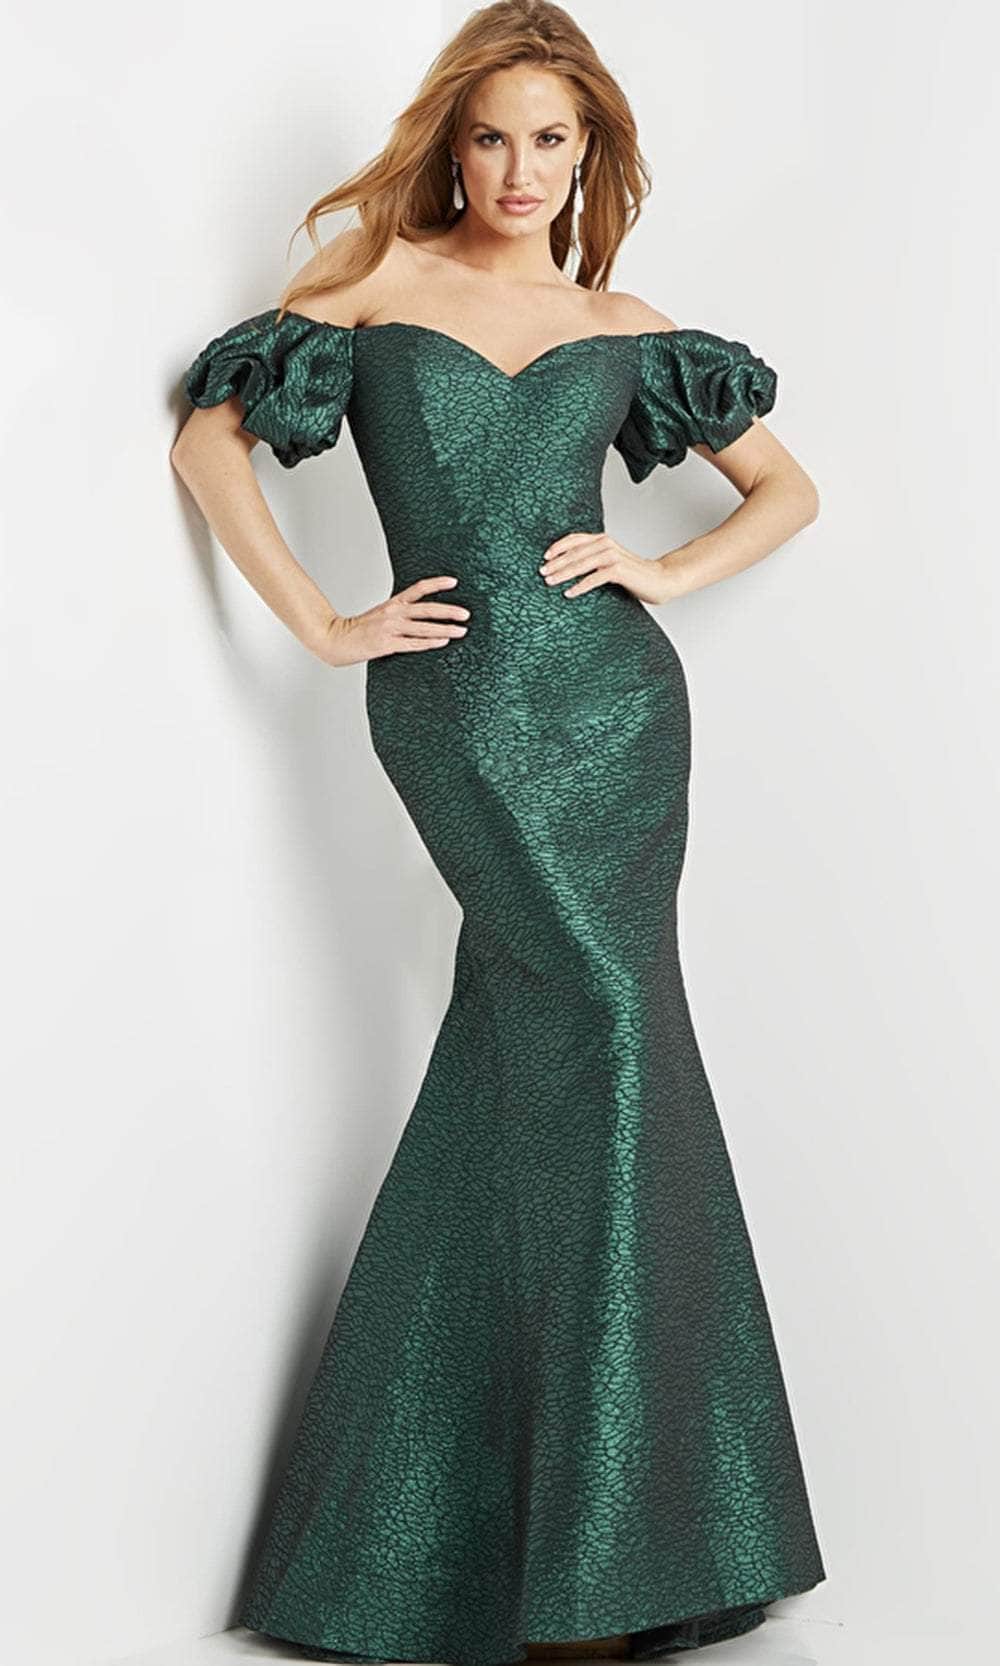 Jovani 24044 - Puff Sleeve Off-Shoulder Evening Gown Prom Dresses 00 / Green